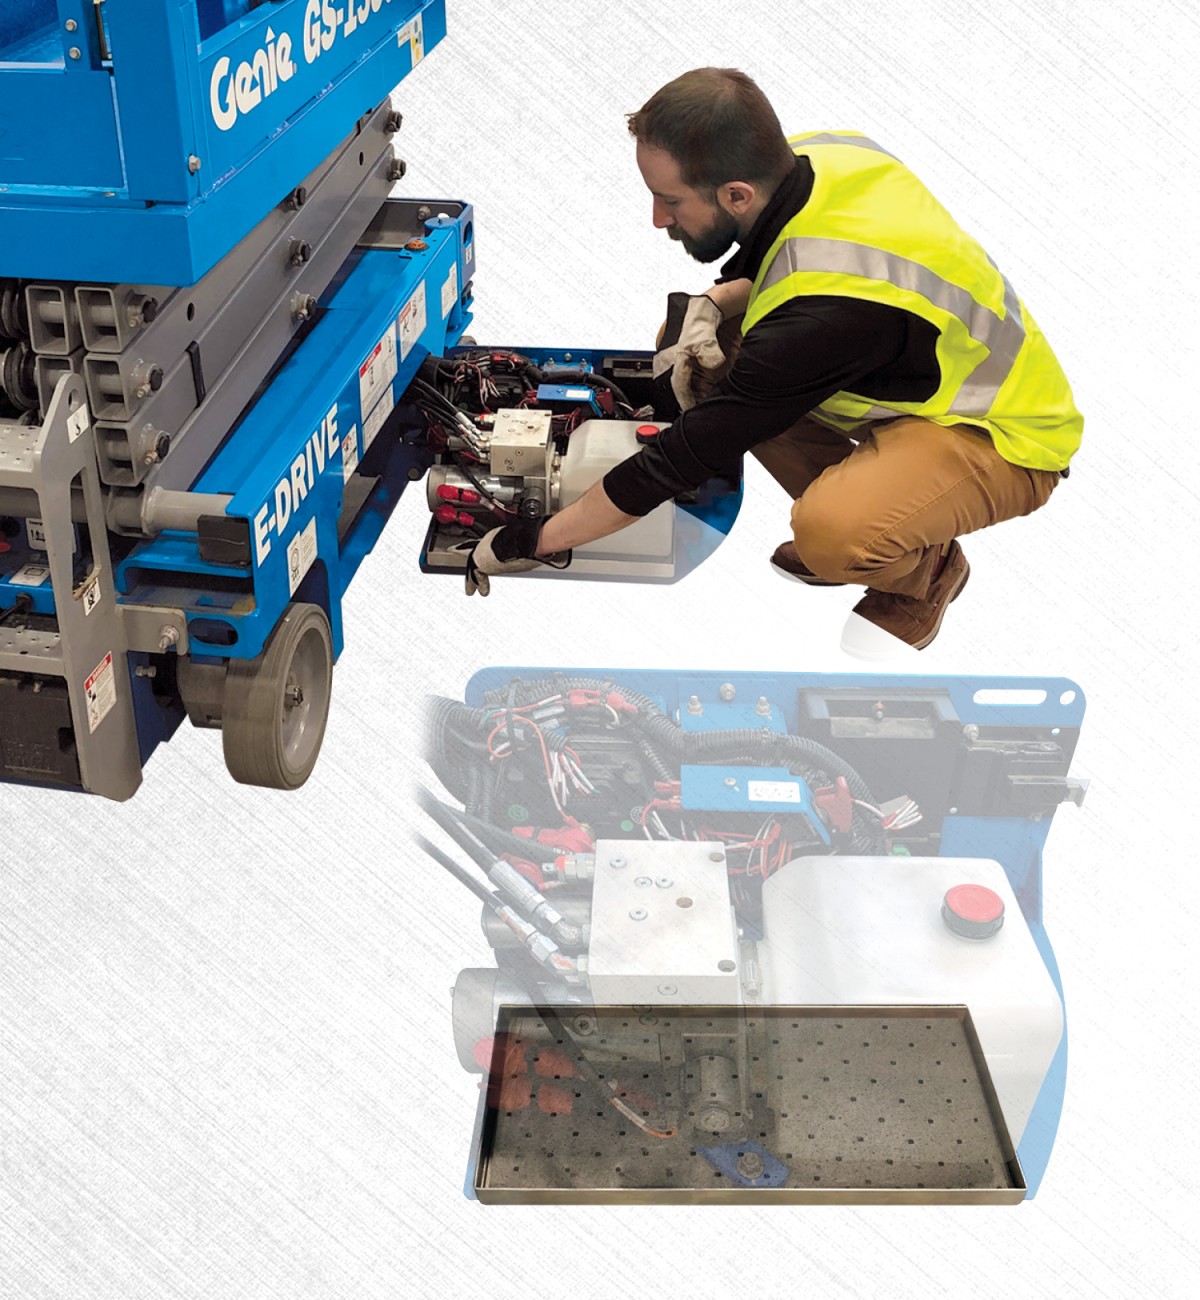 Genie Announces Its Spill Guard Hydraulic Oil Containment System Is Available Globally